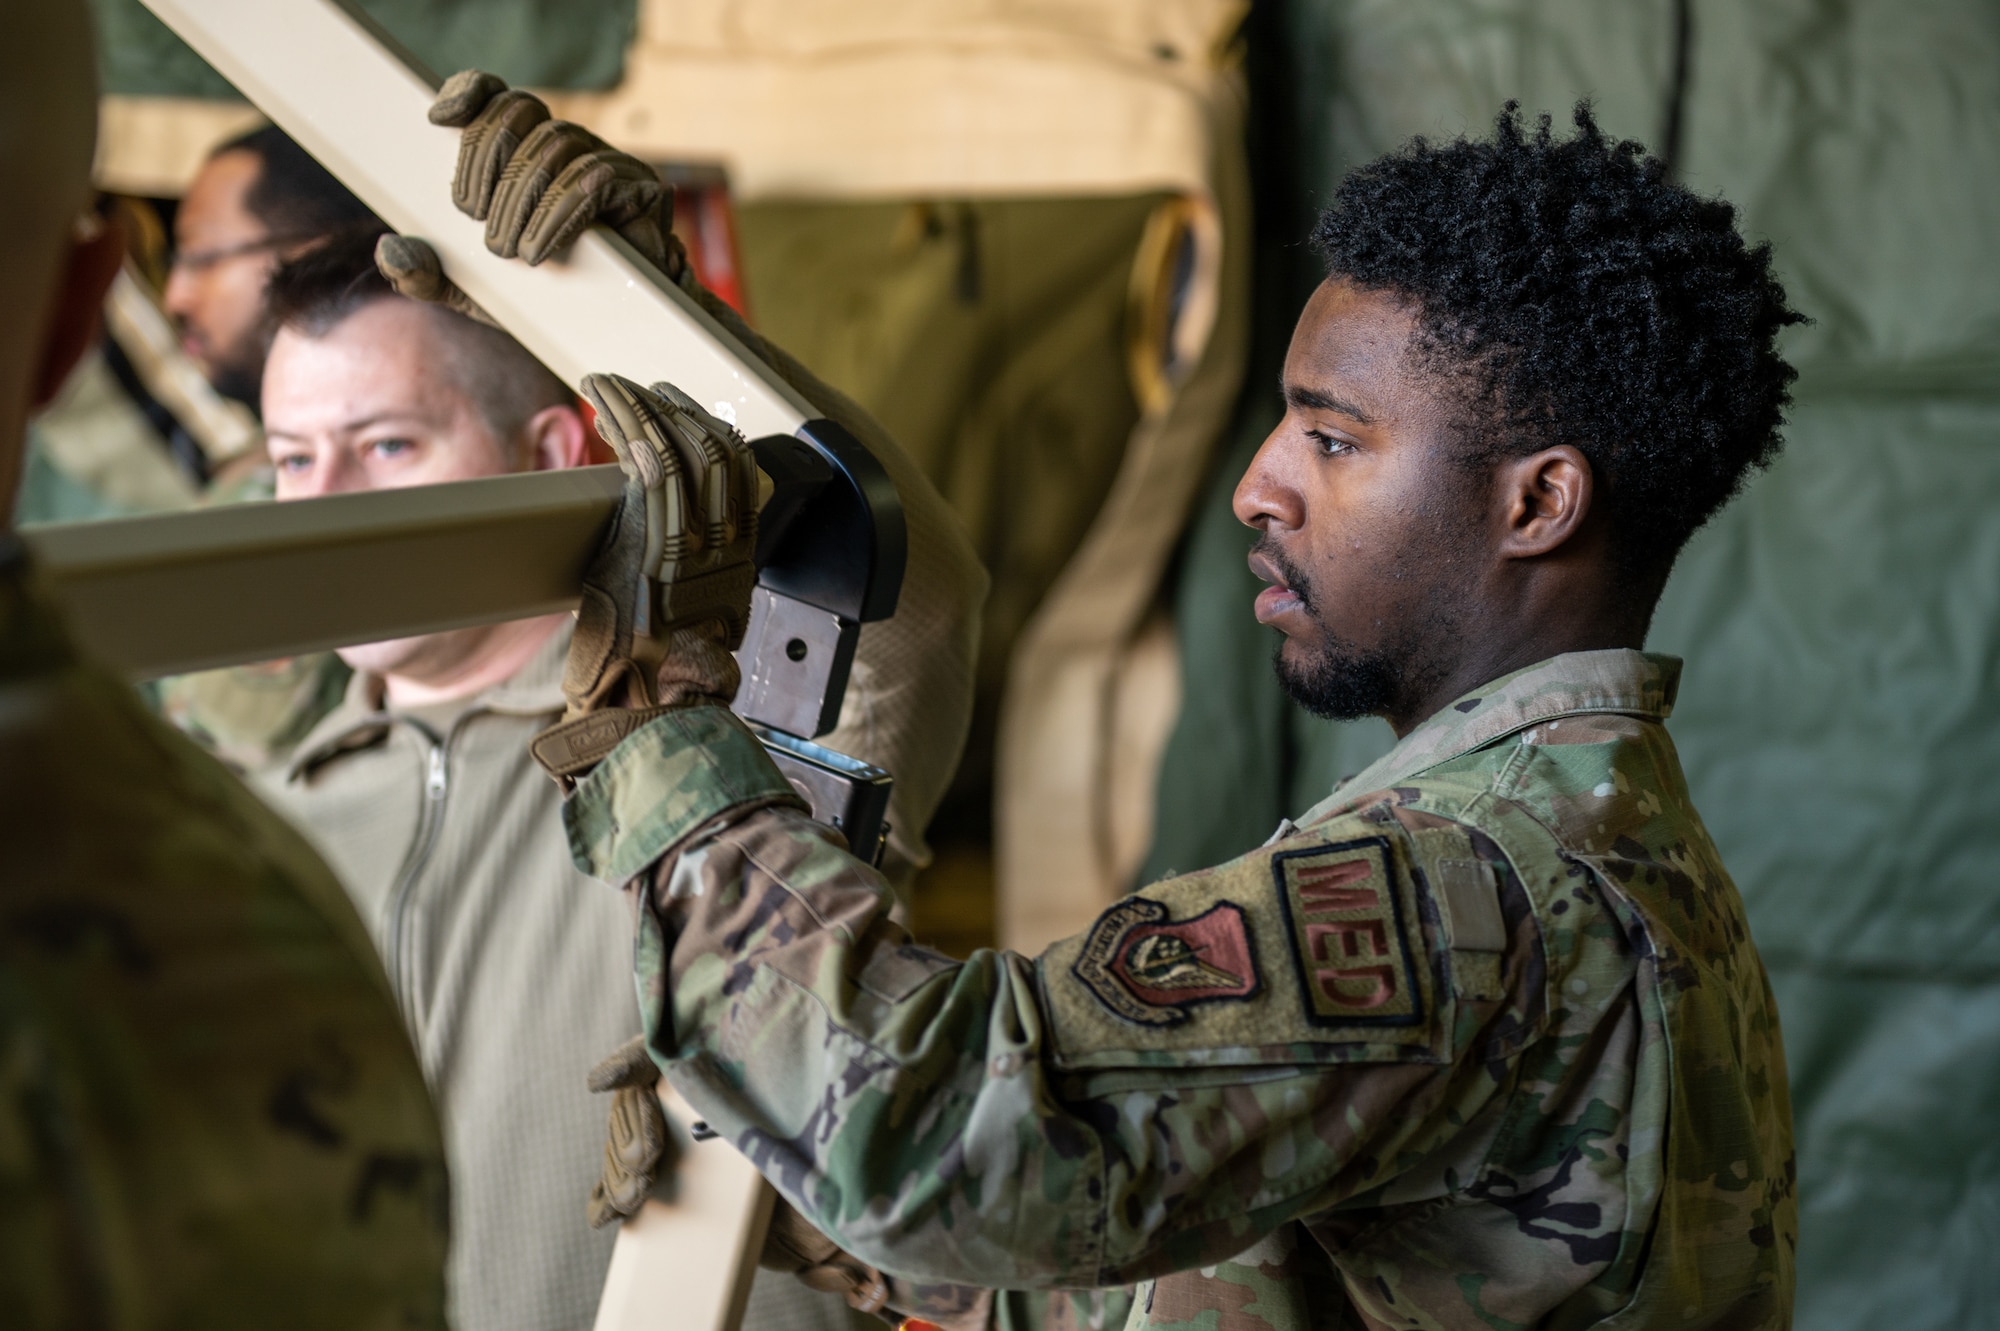 U.S. Air Force Senior Airman Bryson Lyles, 51st Operational Medical Readiness Squadron dental lab technician, moves the frame leg of a Tent Kit 2 (TK2) expeditionary medical support shelter into position during a training event at Osan Air Base, Republic of Korea, Jan. 12, 2023.